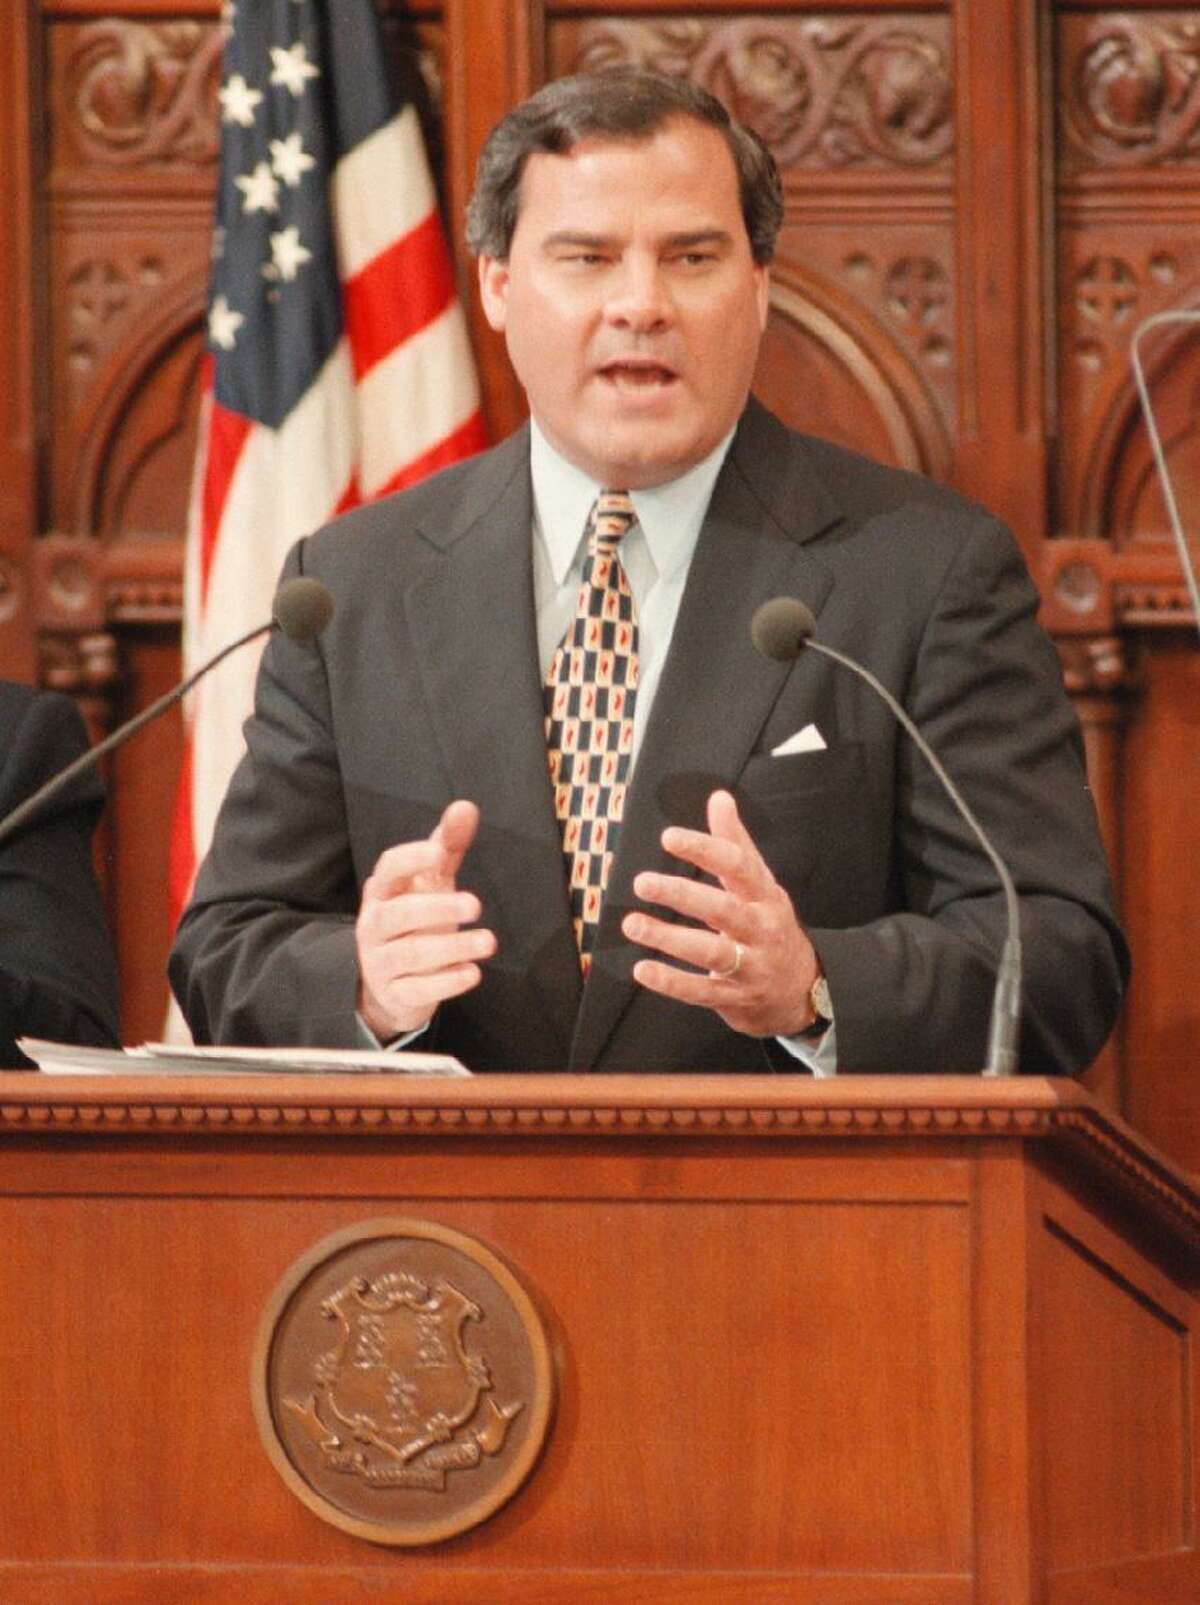 File 01/08/97: Governor John Rowland delivers his State of the State address to members of the state Legislators